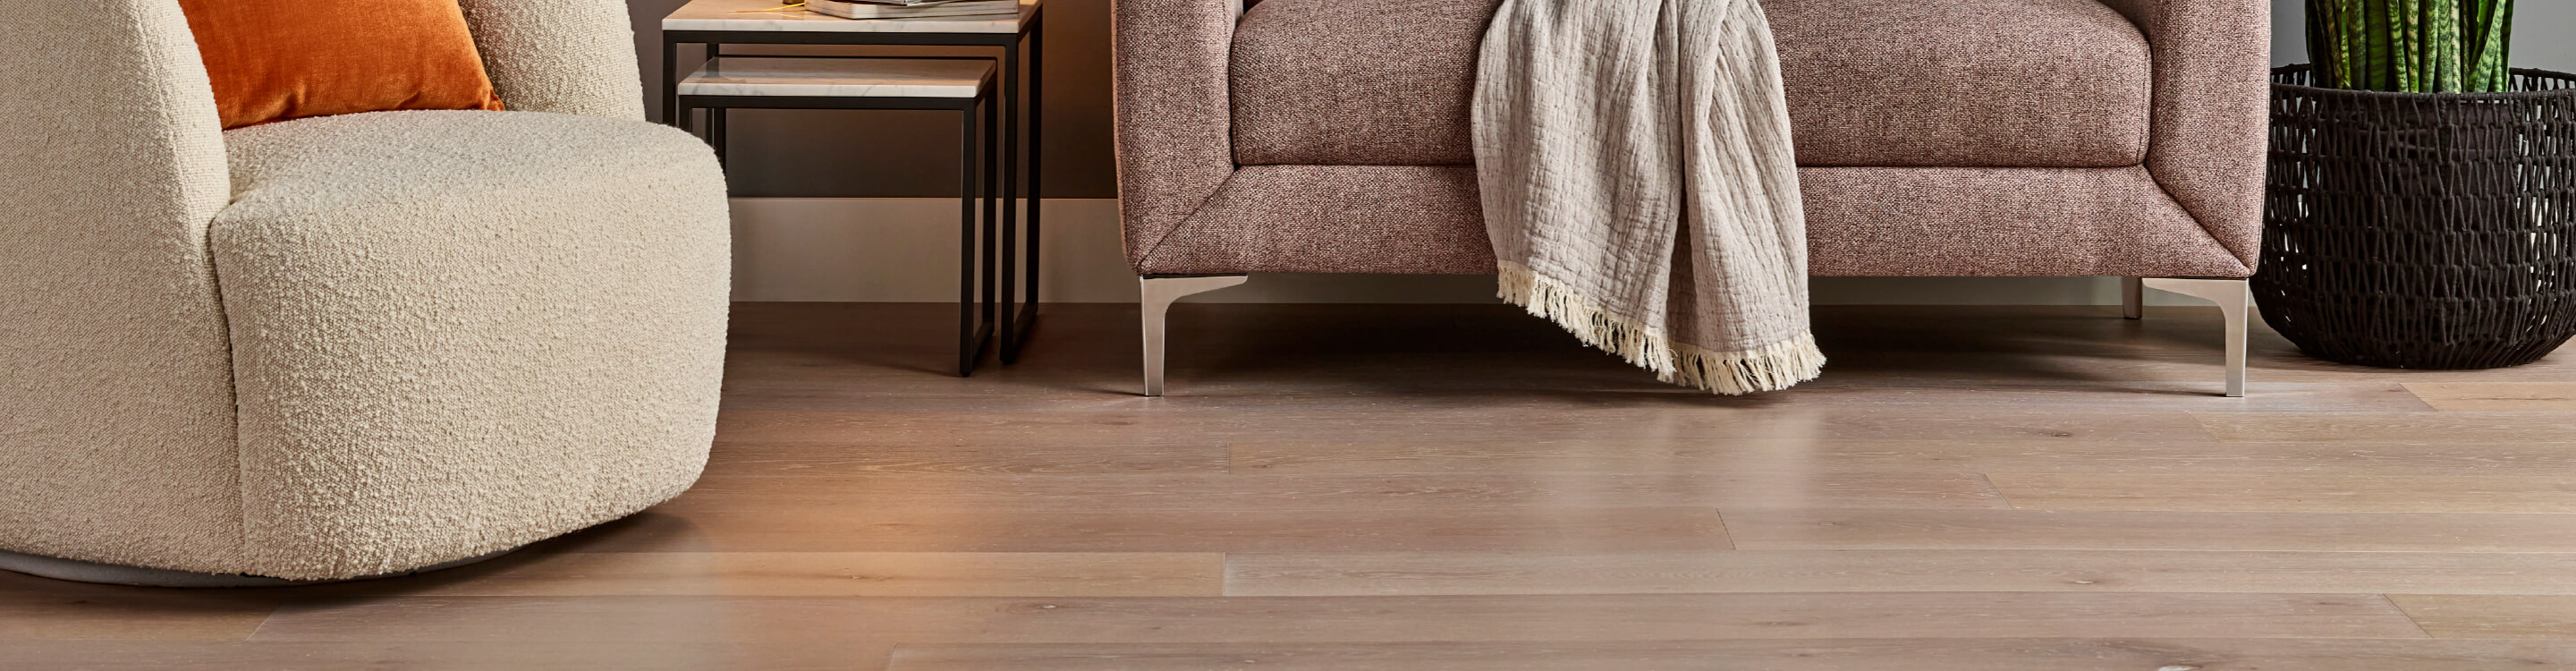 Selecting Luxury Vinyl Plank: Tips for Your Design